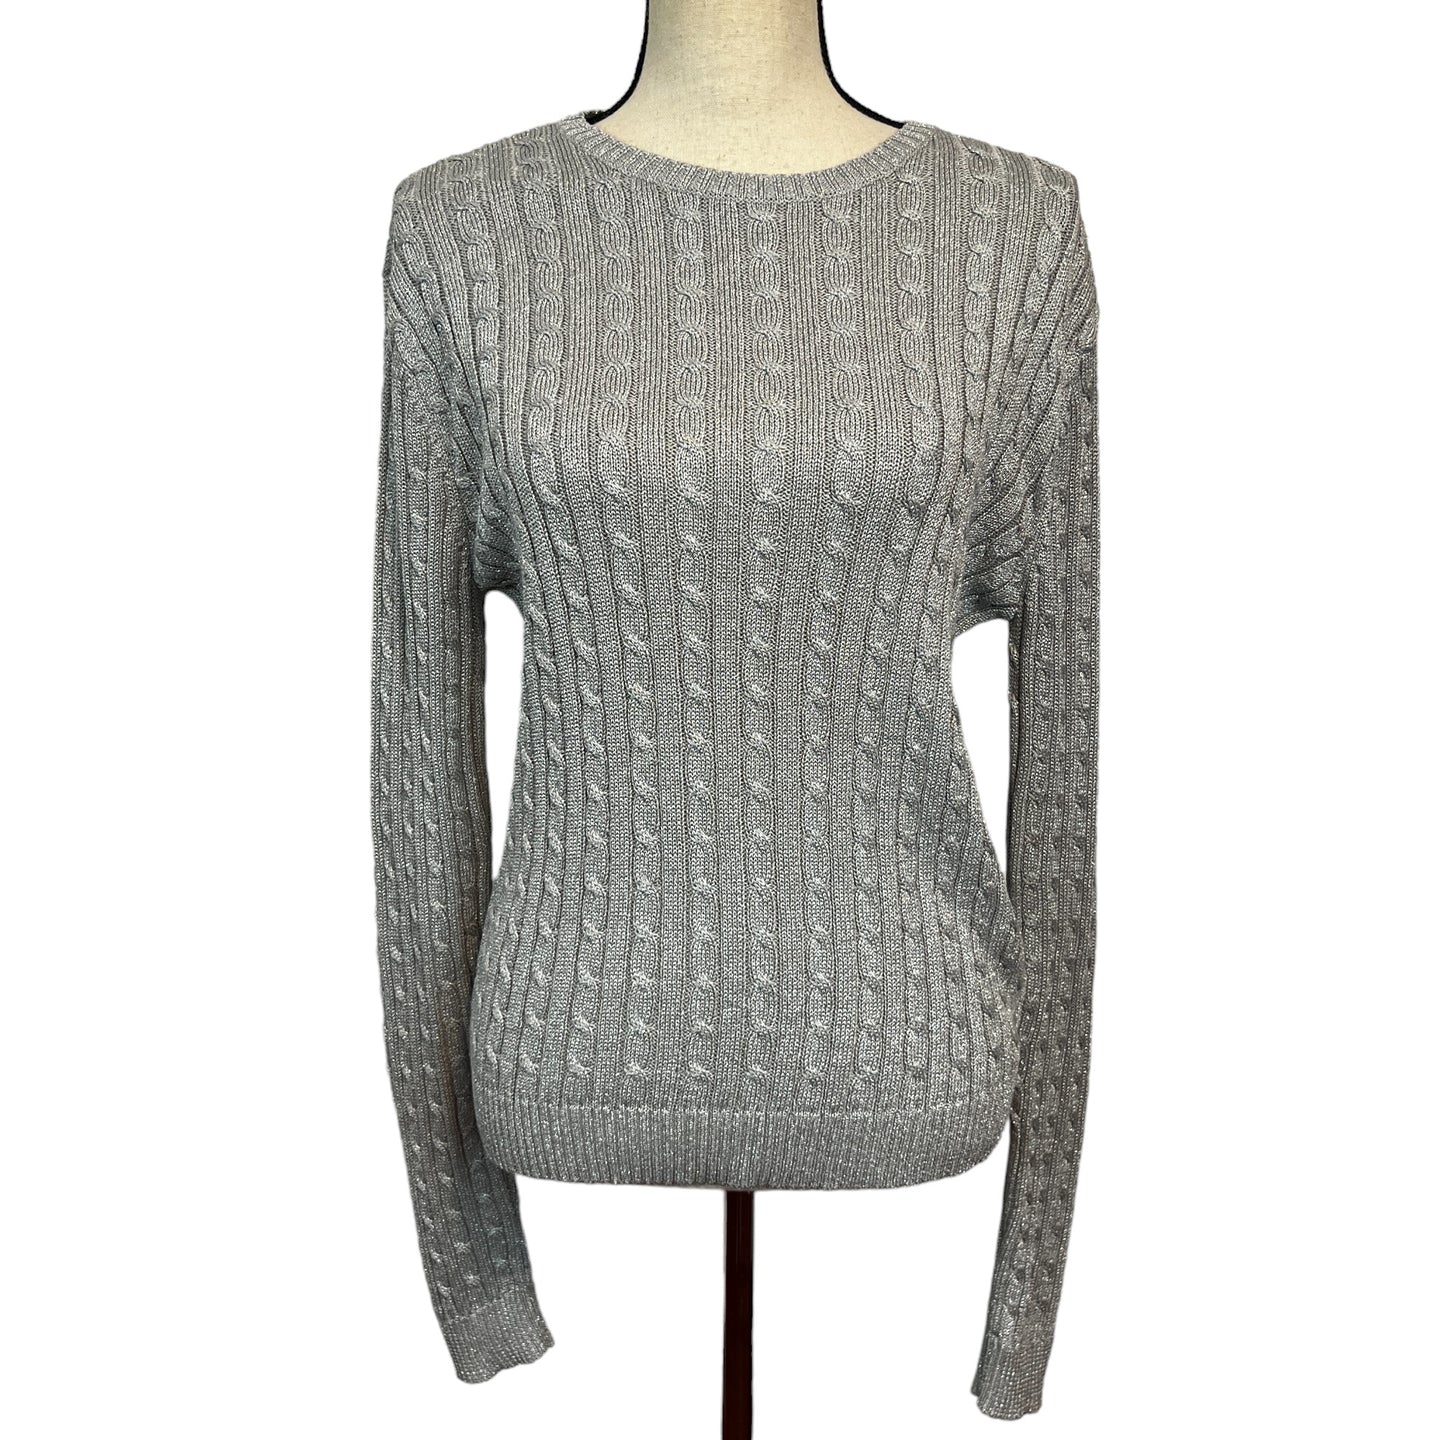 Silver Metallic Cable Knit Sweater Size XL